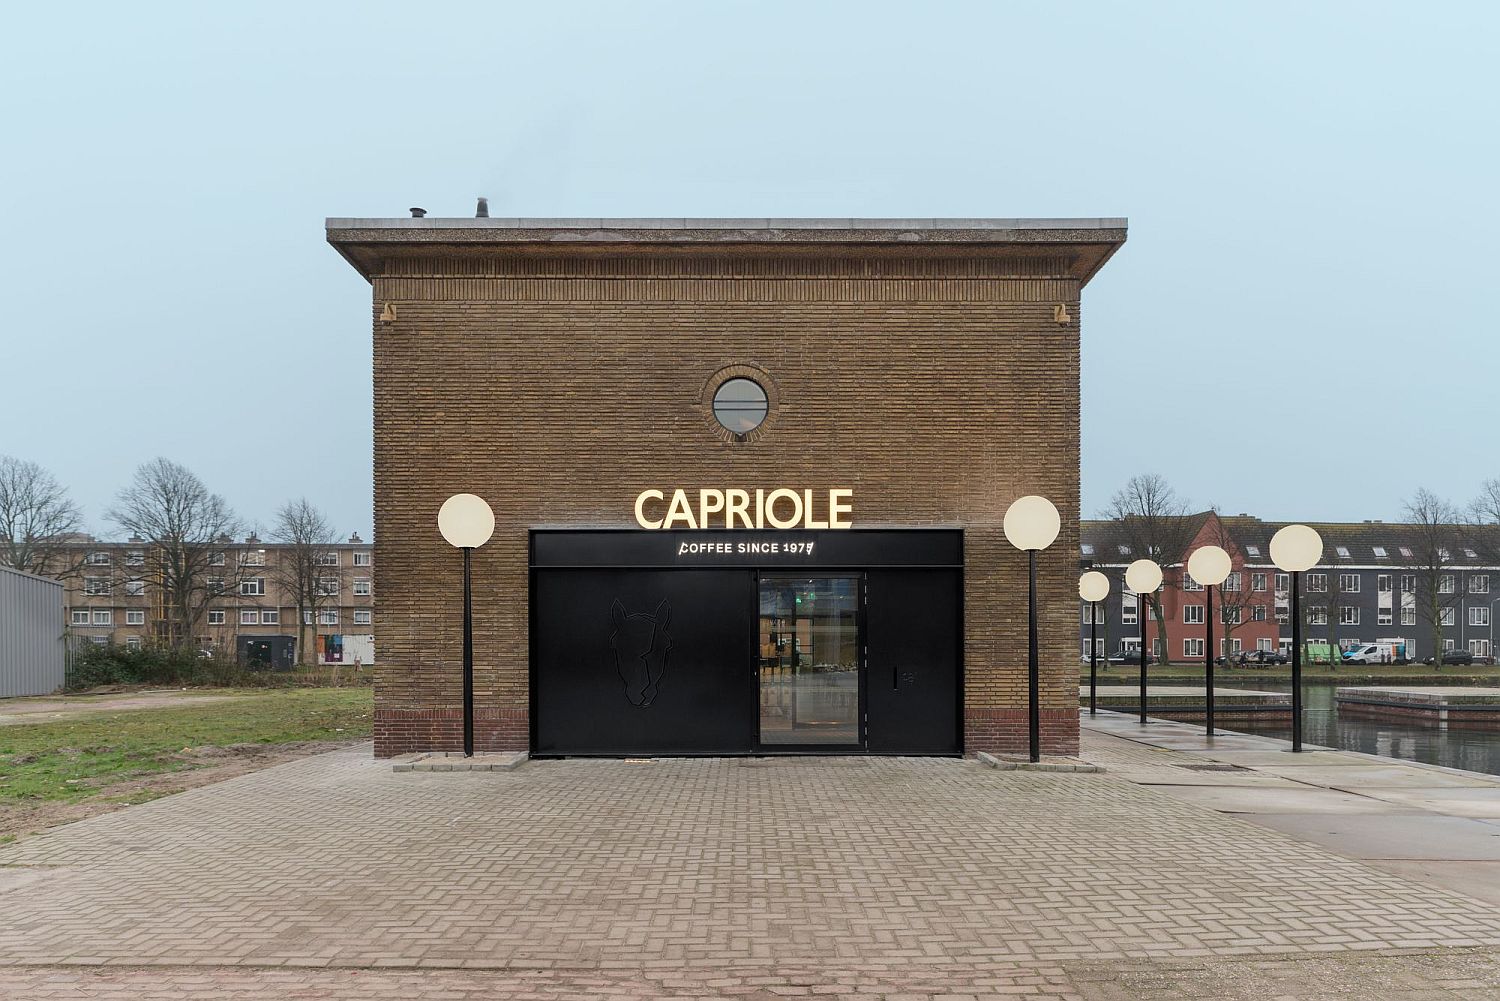 Capriole Café and restaurant in The Hague